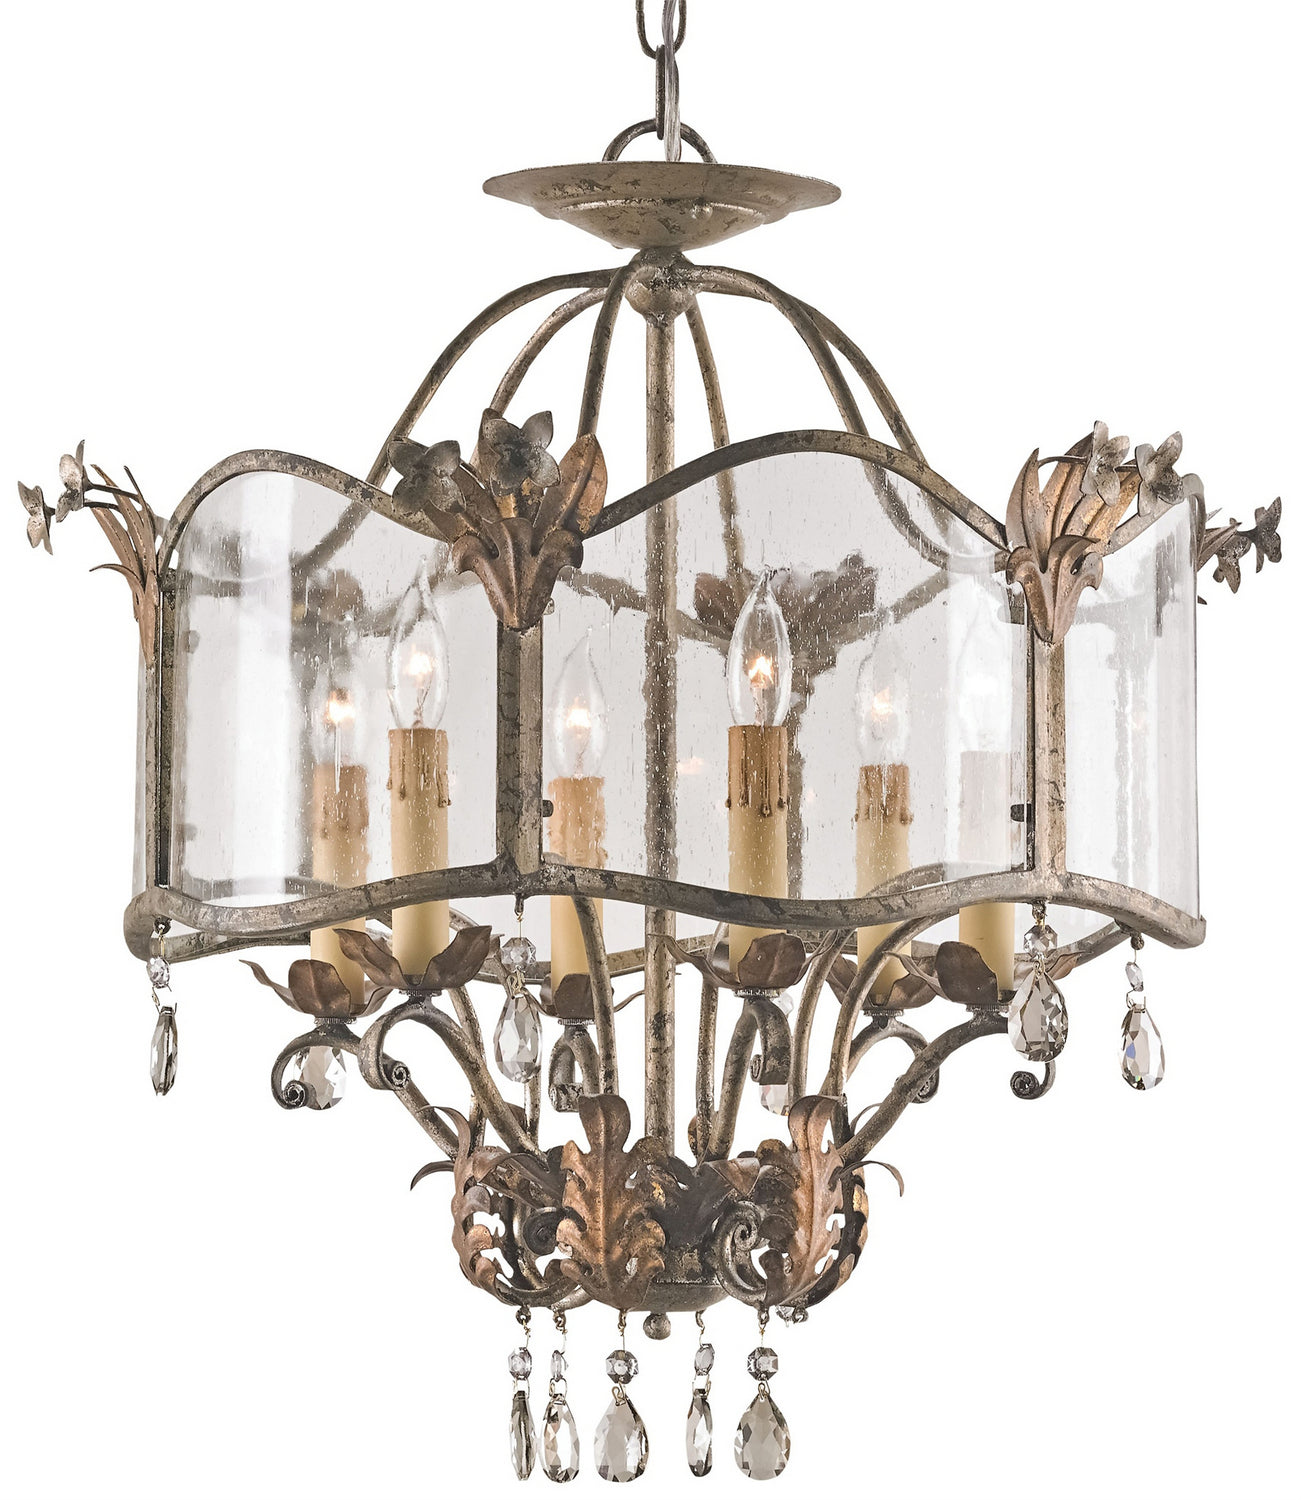 Six Light Lantern from the Winterthur collection in Viejo Gold/Viejo Silver finish